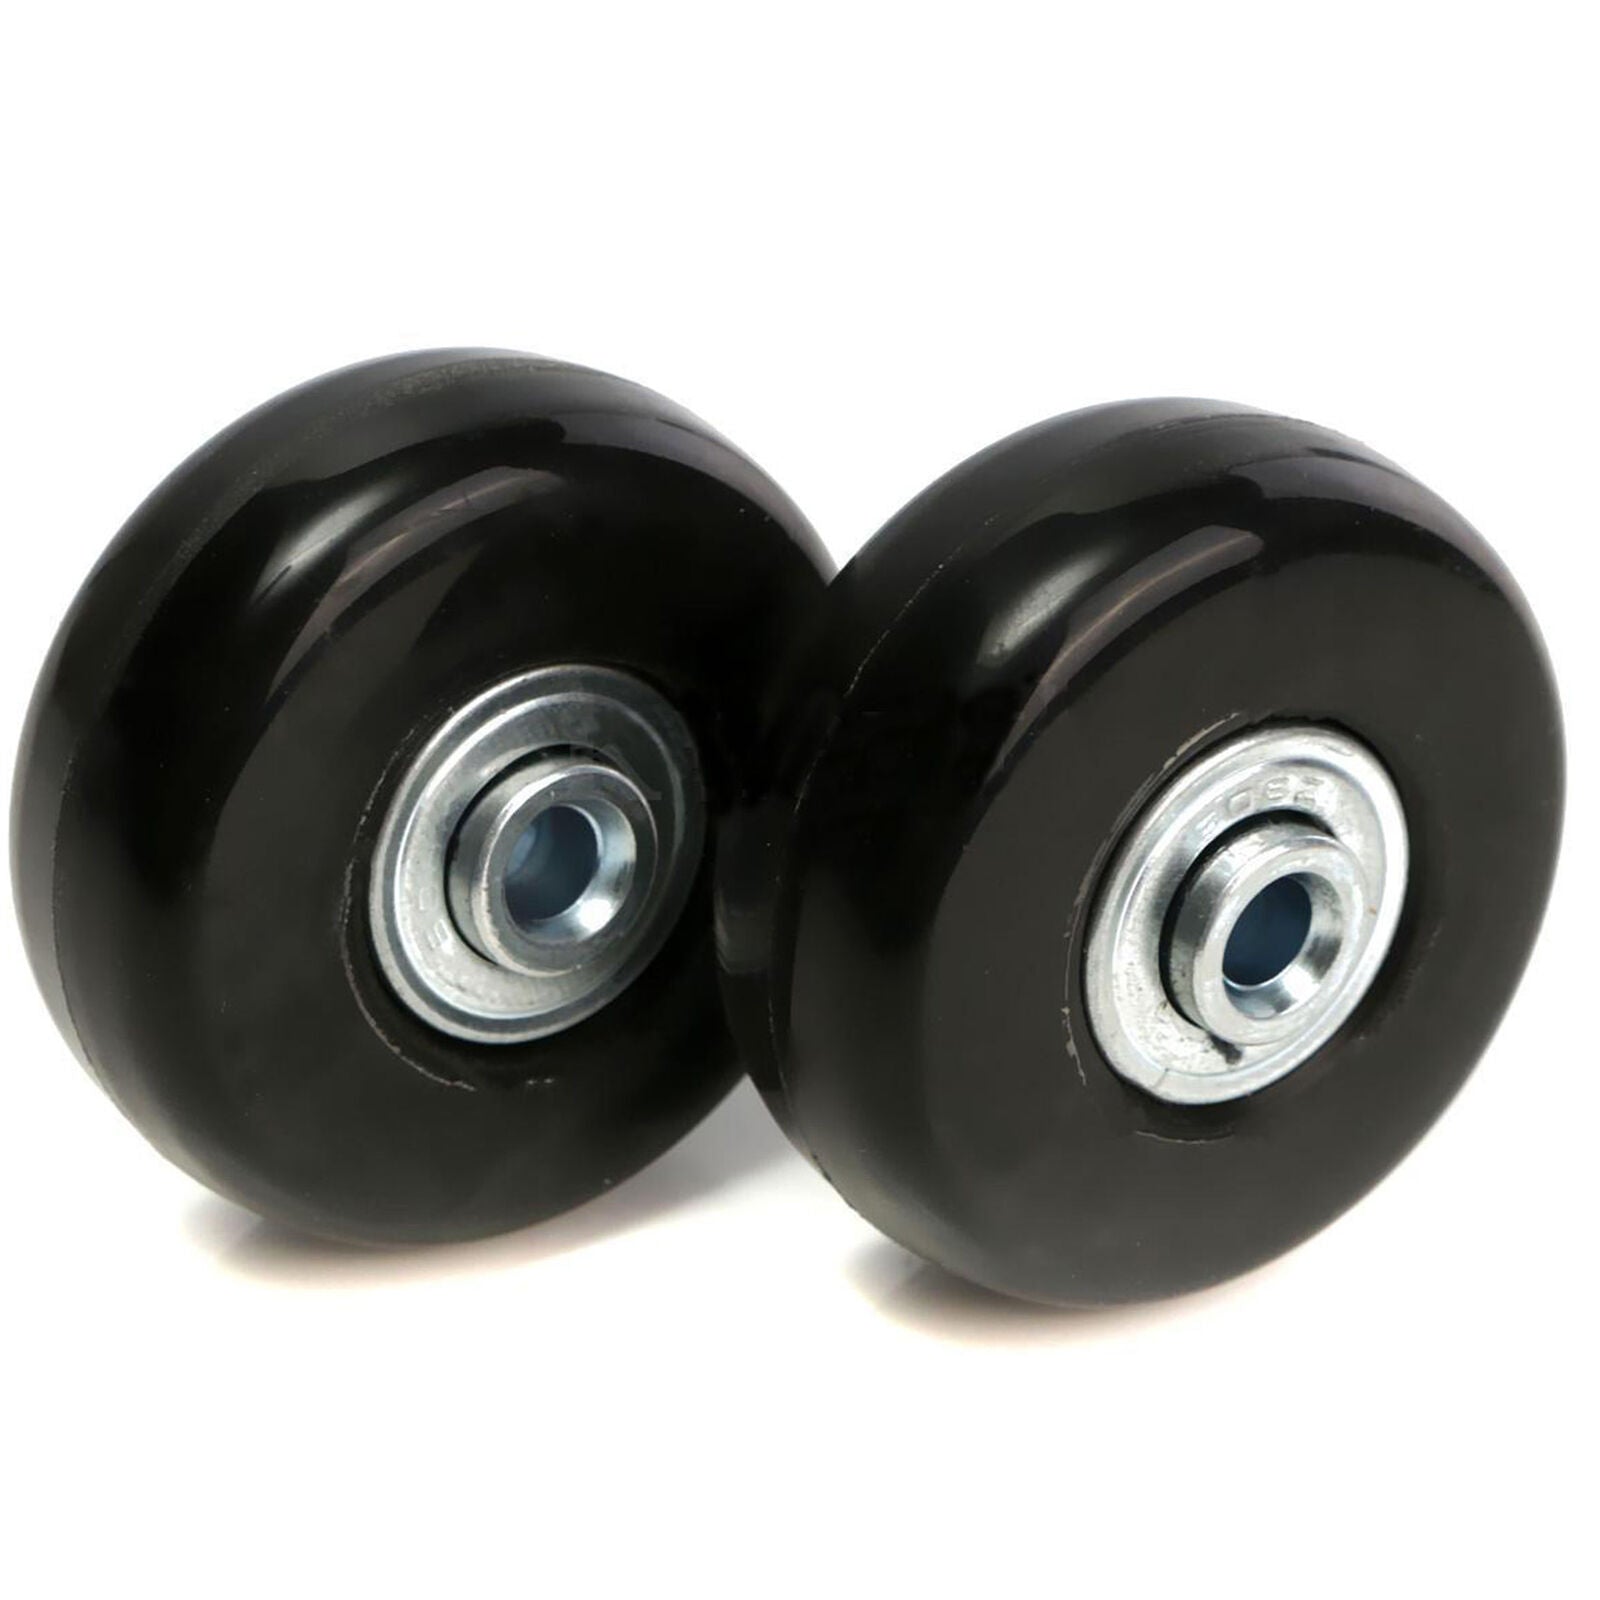 2pcs 50mm Luggage Suitcase Replacement Wheels Axles Rubber Deluxe Repair